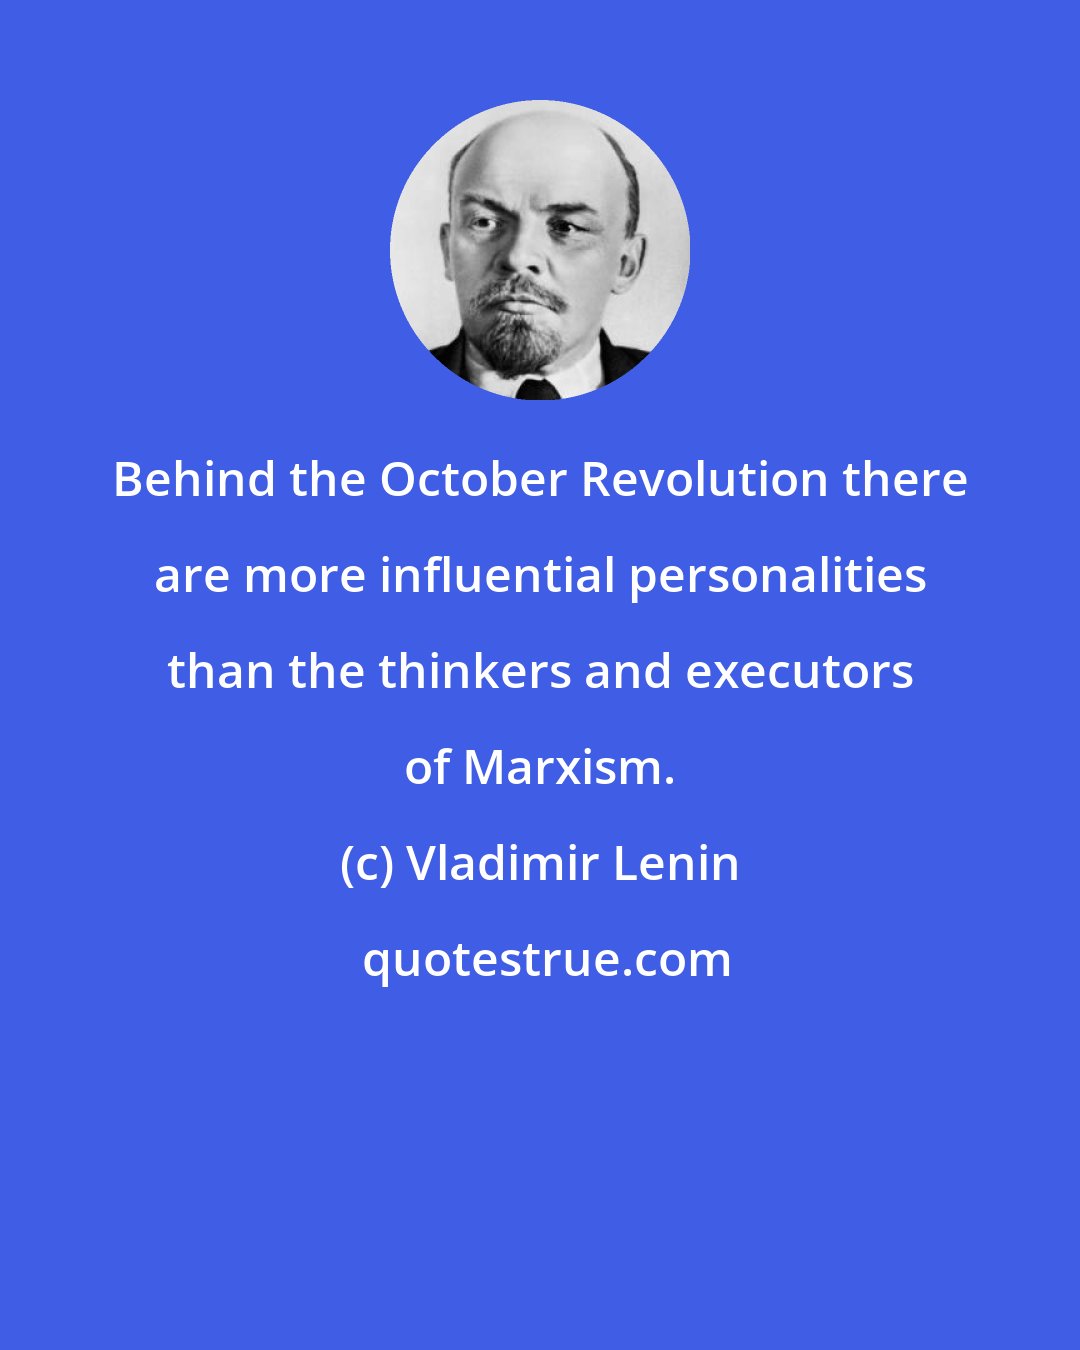 Vladimir Lenin: Behind the October Revolution there are more influential personalities than the thinkers and executors of Marxism.